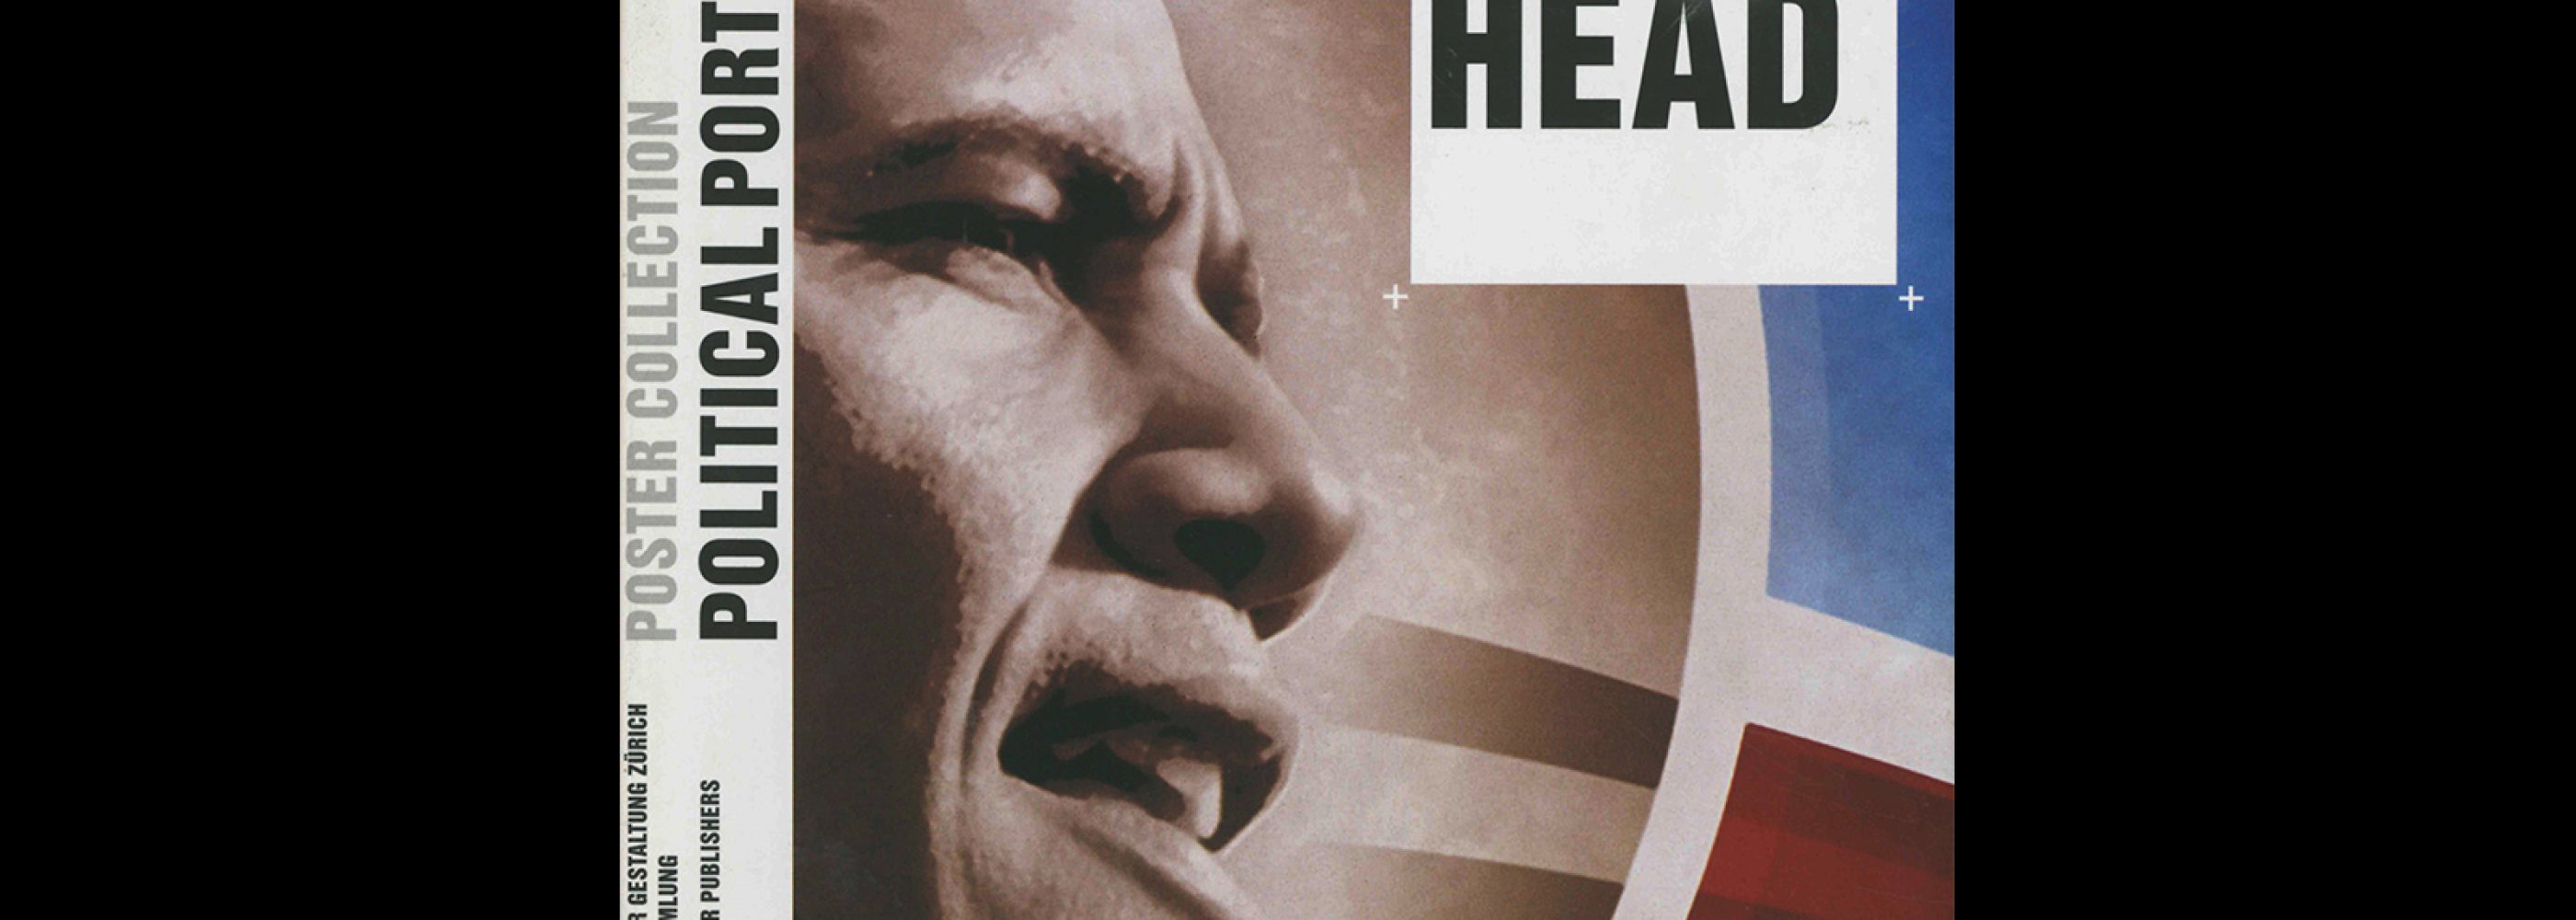 Head to Head, Poster Collection 19, 2009